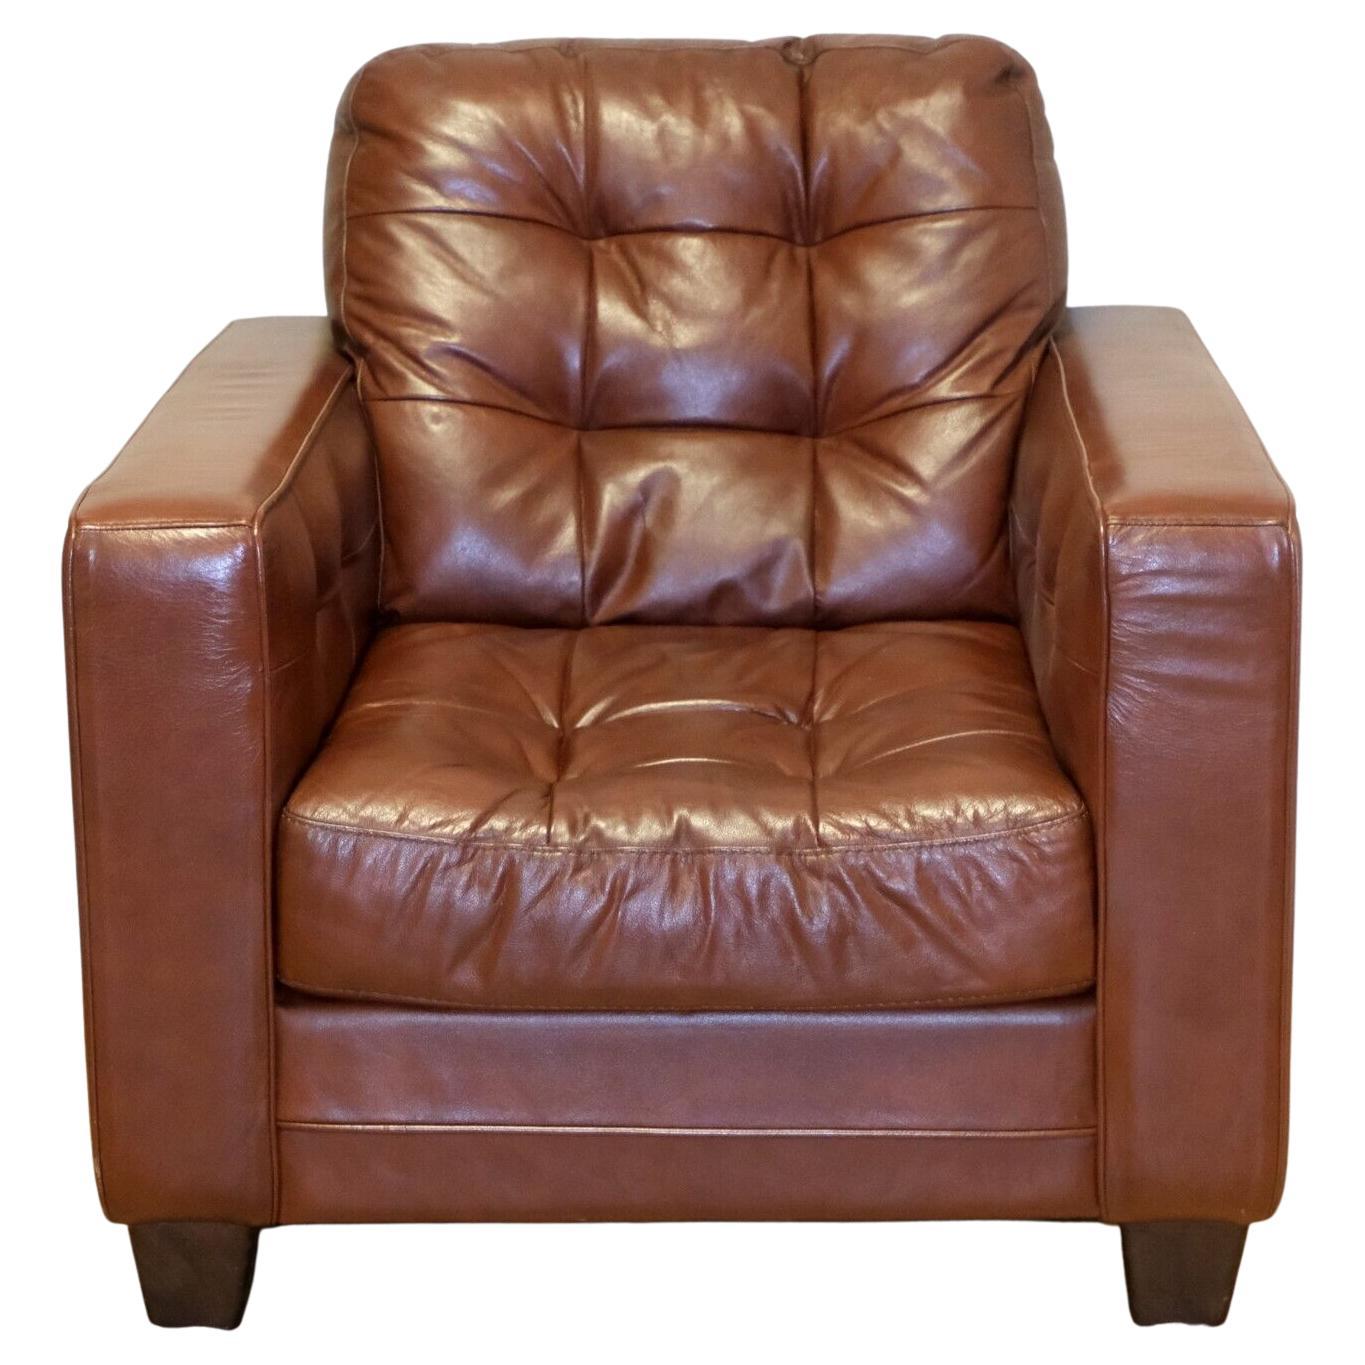 AGED KNOLL STYLE BROWN LEATHER ARMCHAIR CHESTERFIELD STYLE BUTTONING TRACK ARMs For Sale